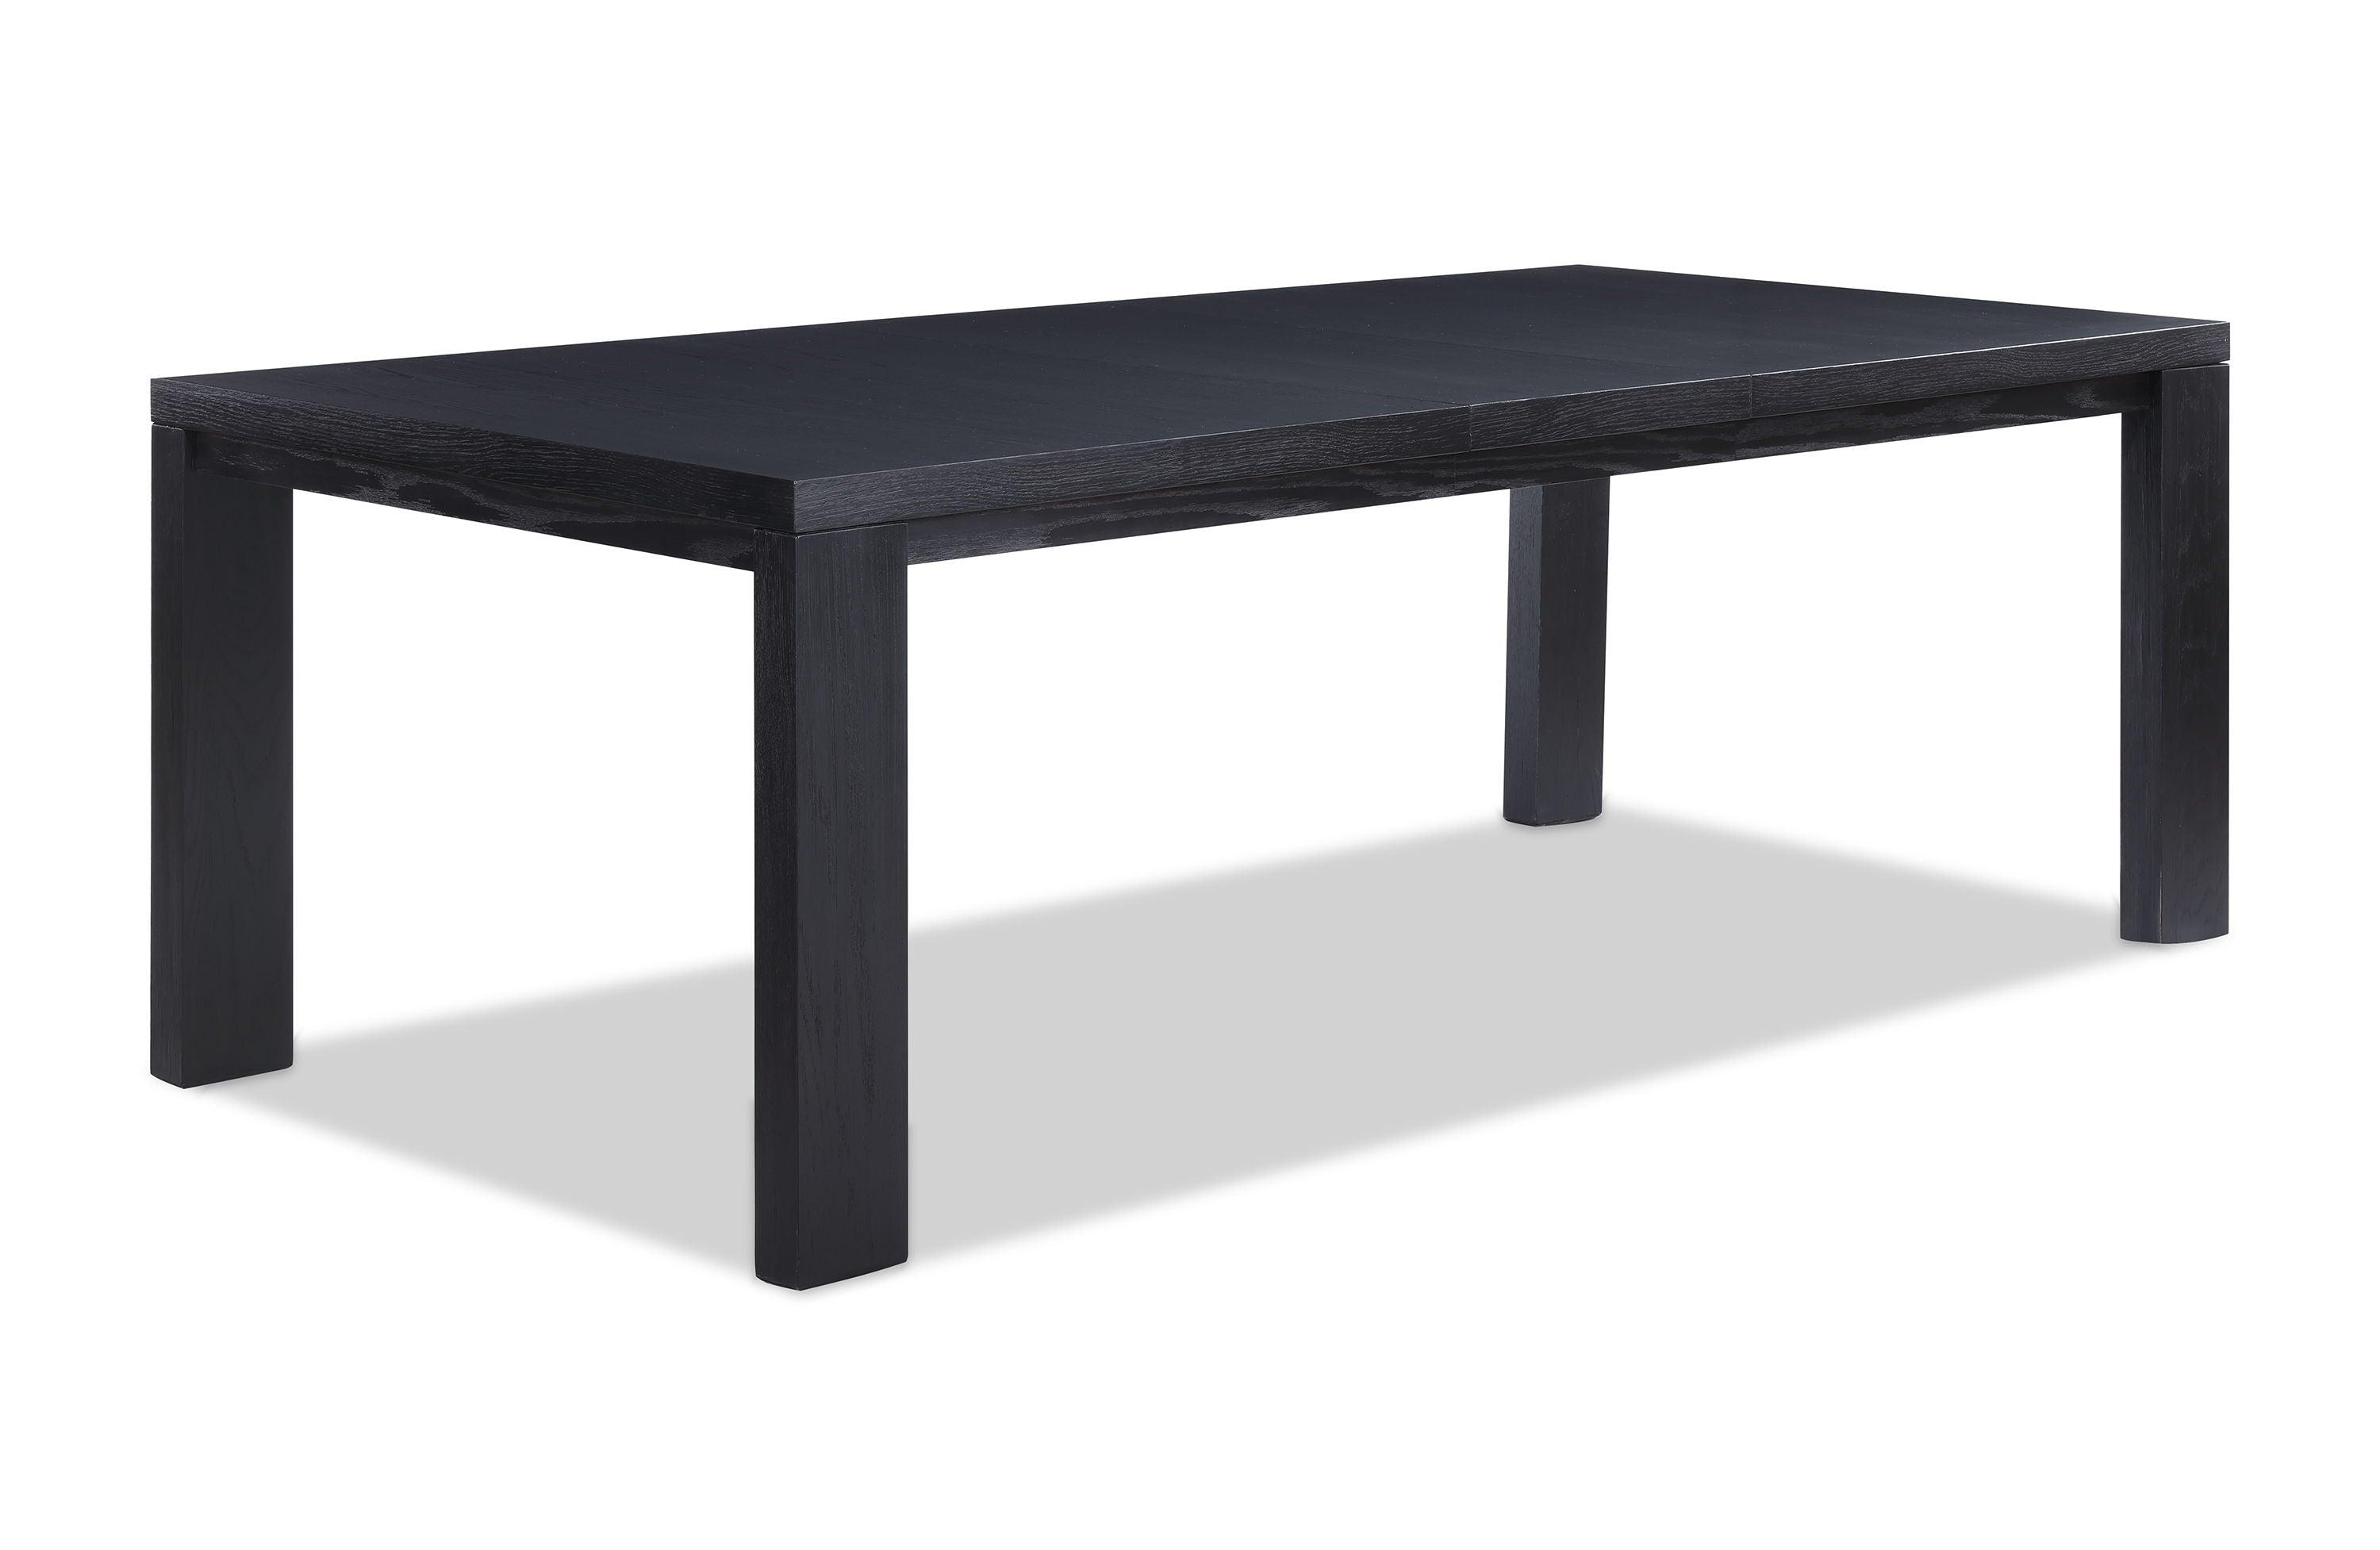 Crown Mark - Pelham - Dining Table (18 Leaf) - Charcoal - 5th Avenue Furniture